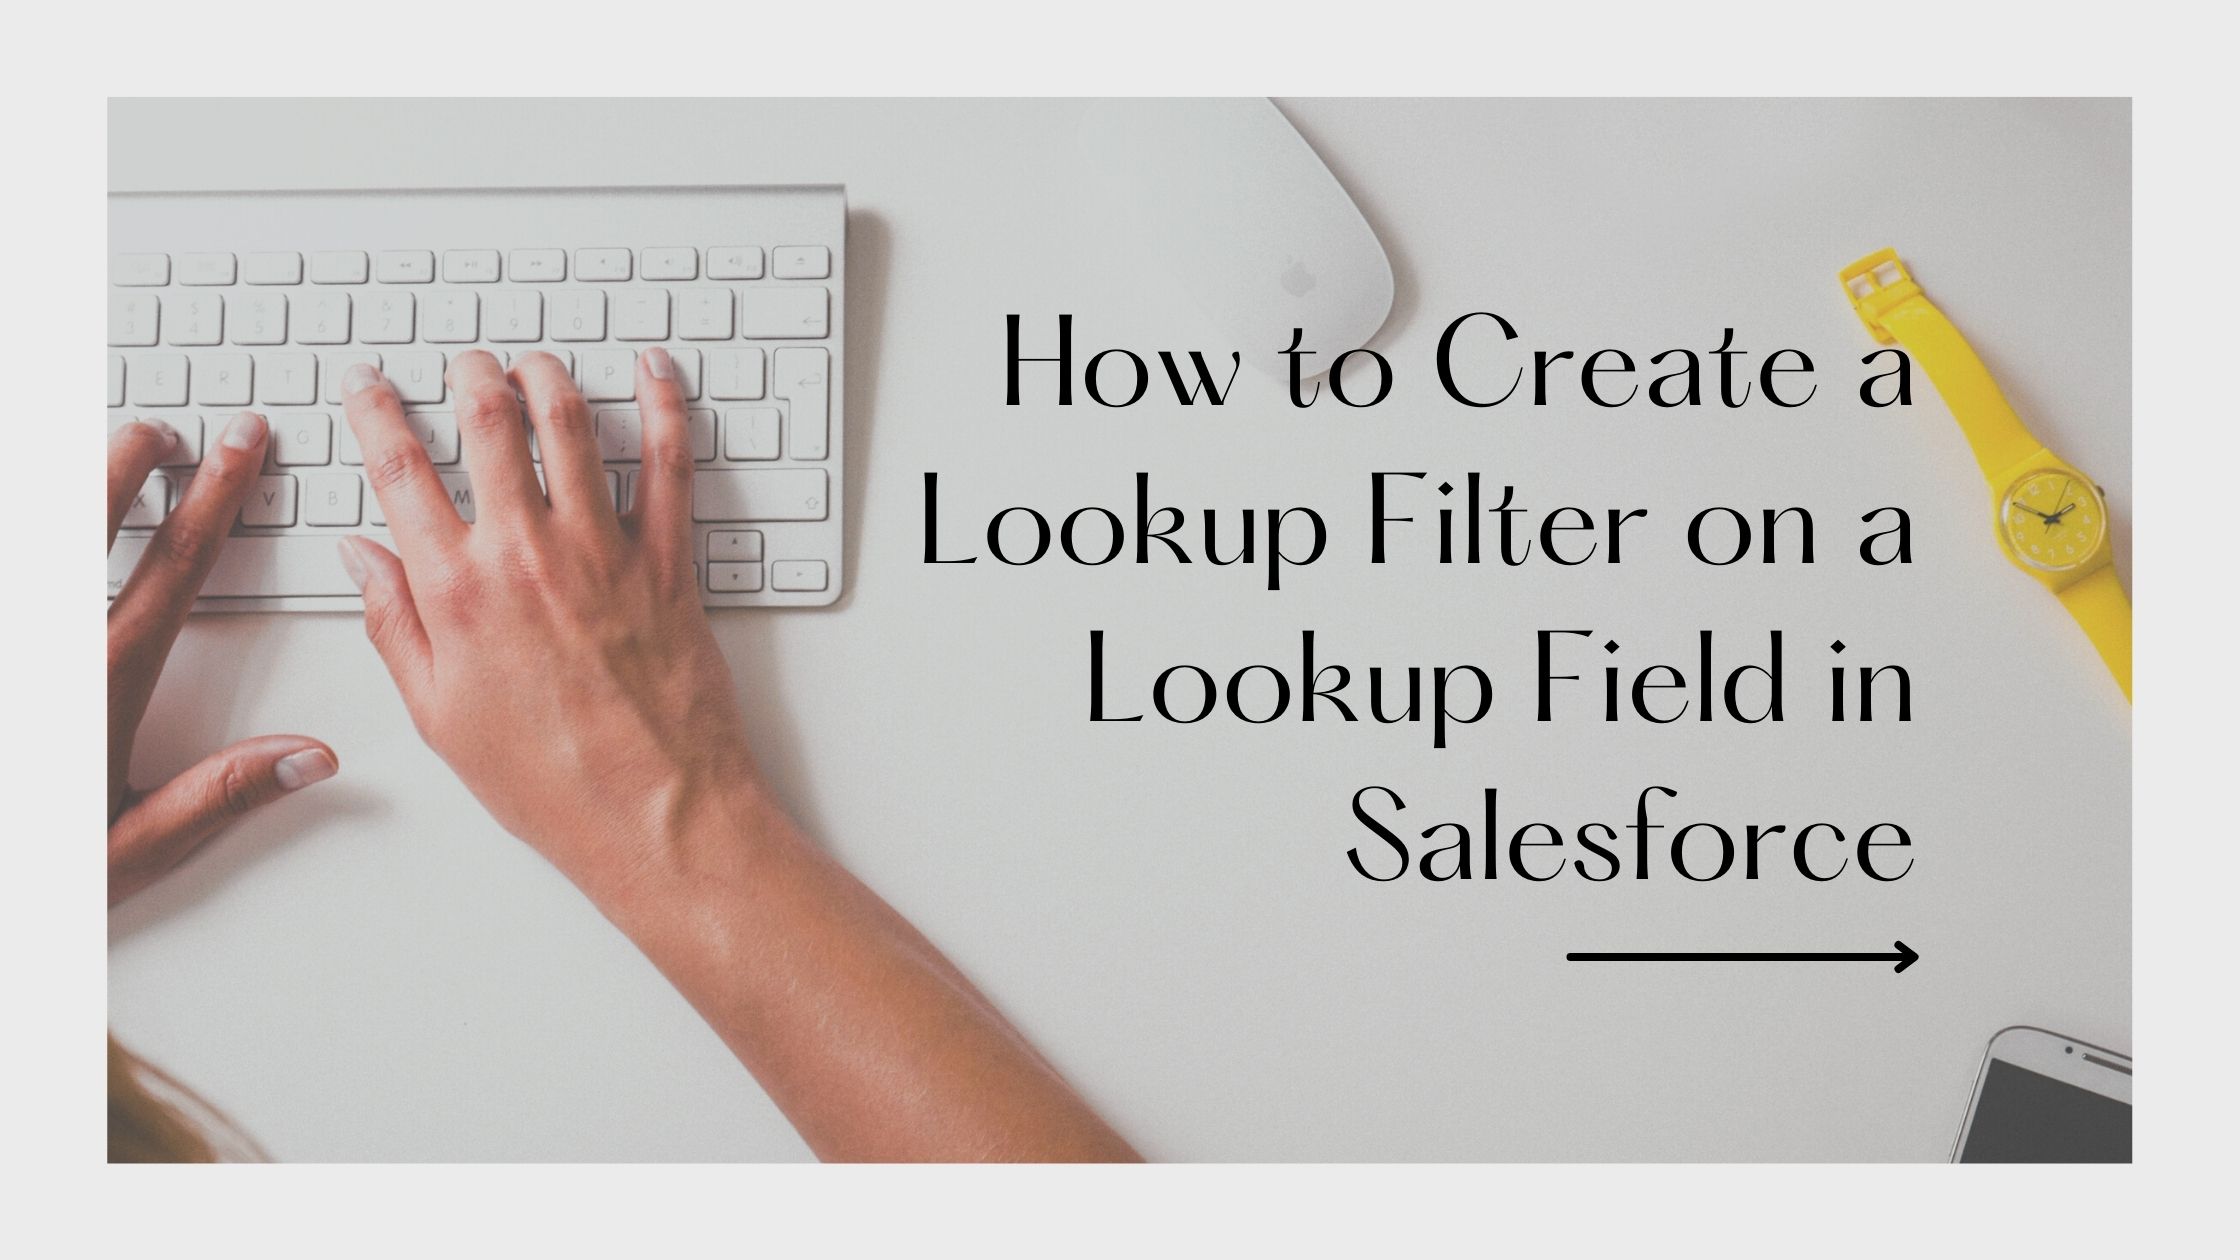 How to Create a Lookup Filter on a Lookup Field in Salesforce